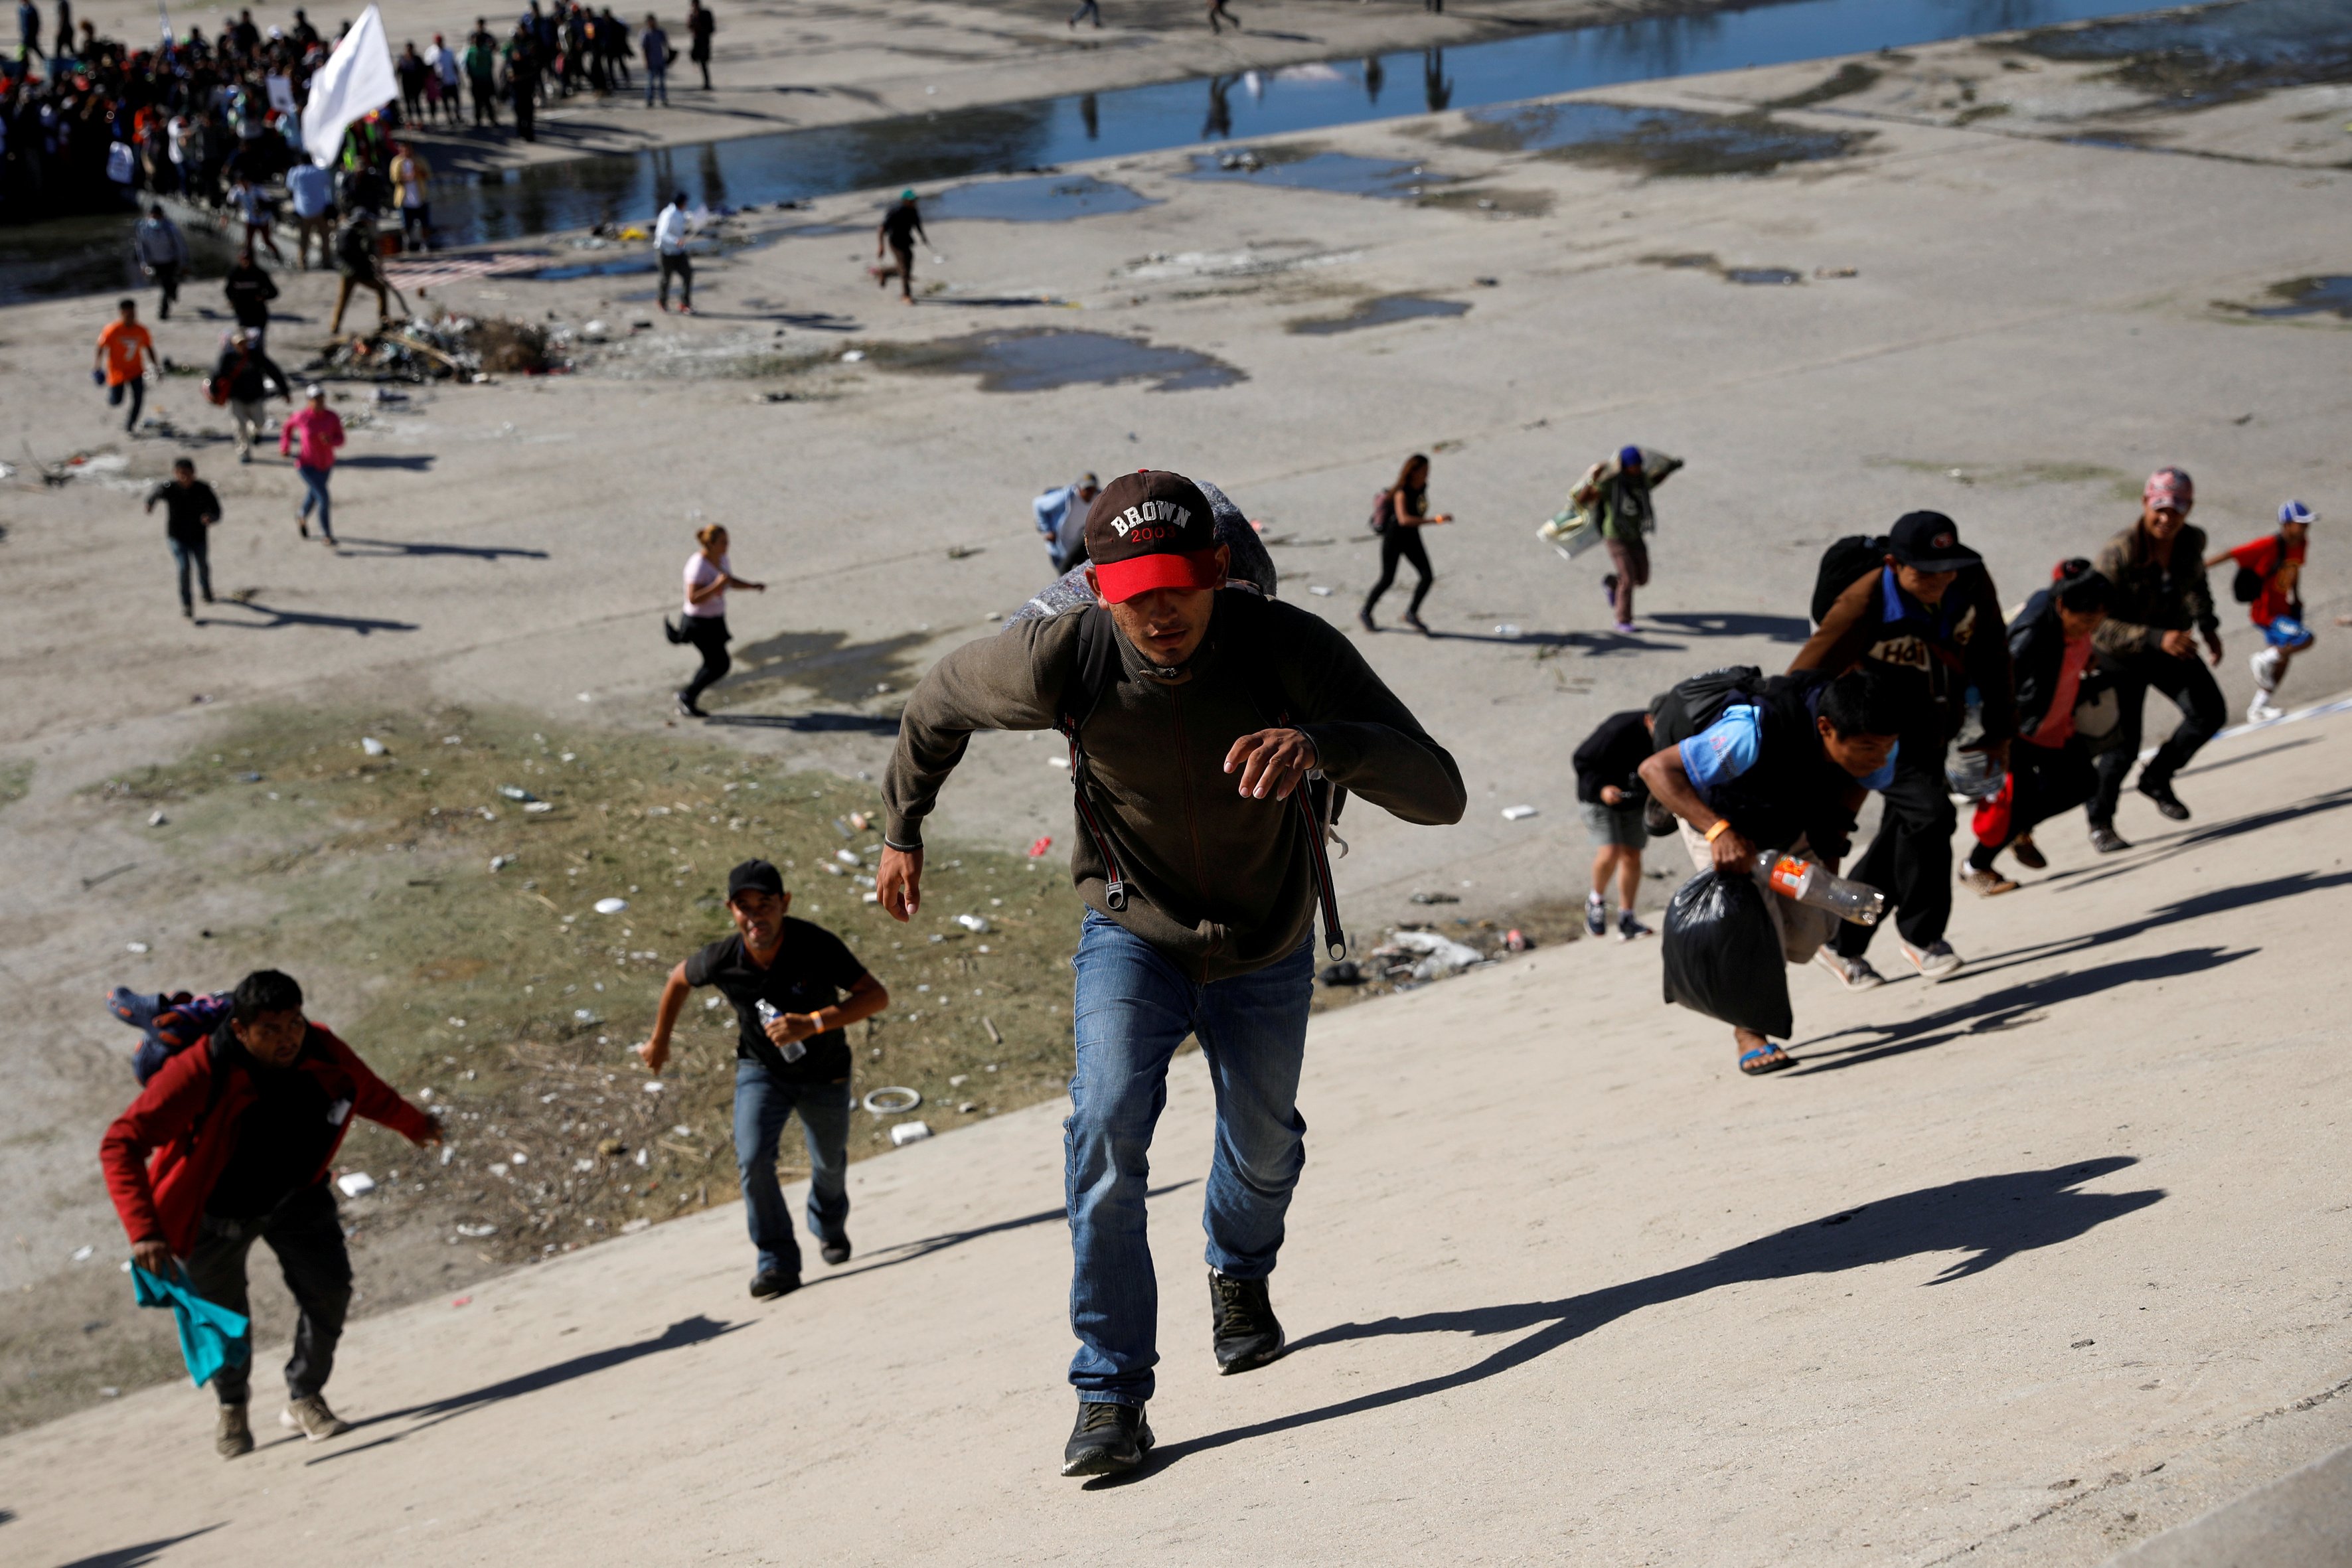 Migrants, part of a caravan of thousands traveling from Central America en route to the United States, run across the Tijuana river to reach the border wall between the U.S. and Mexico in Tijuana